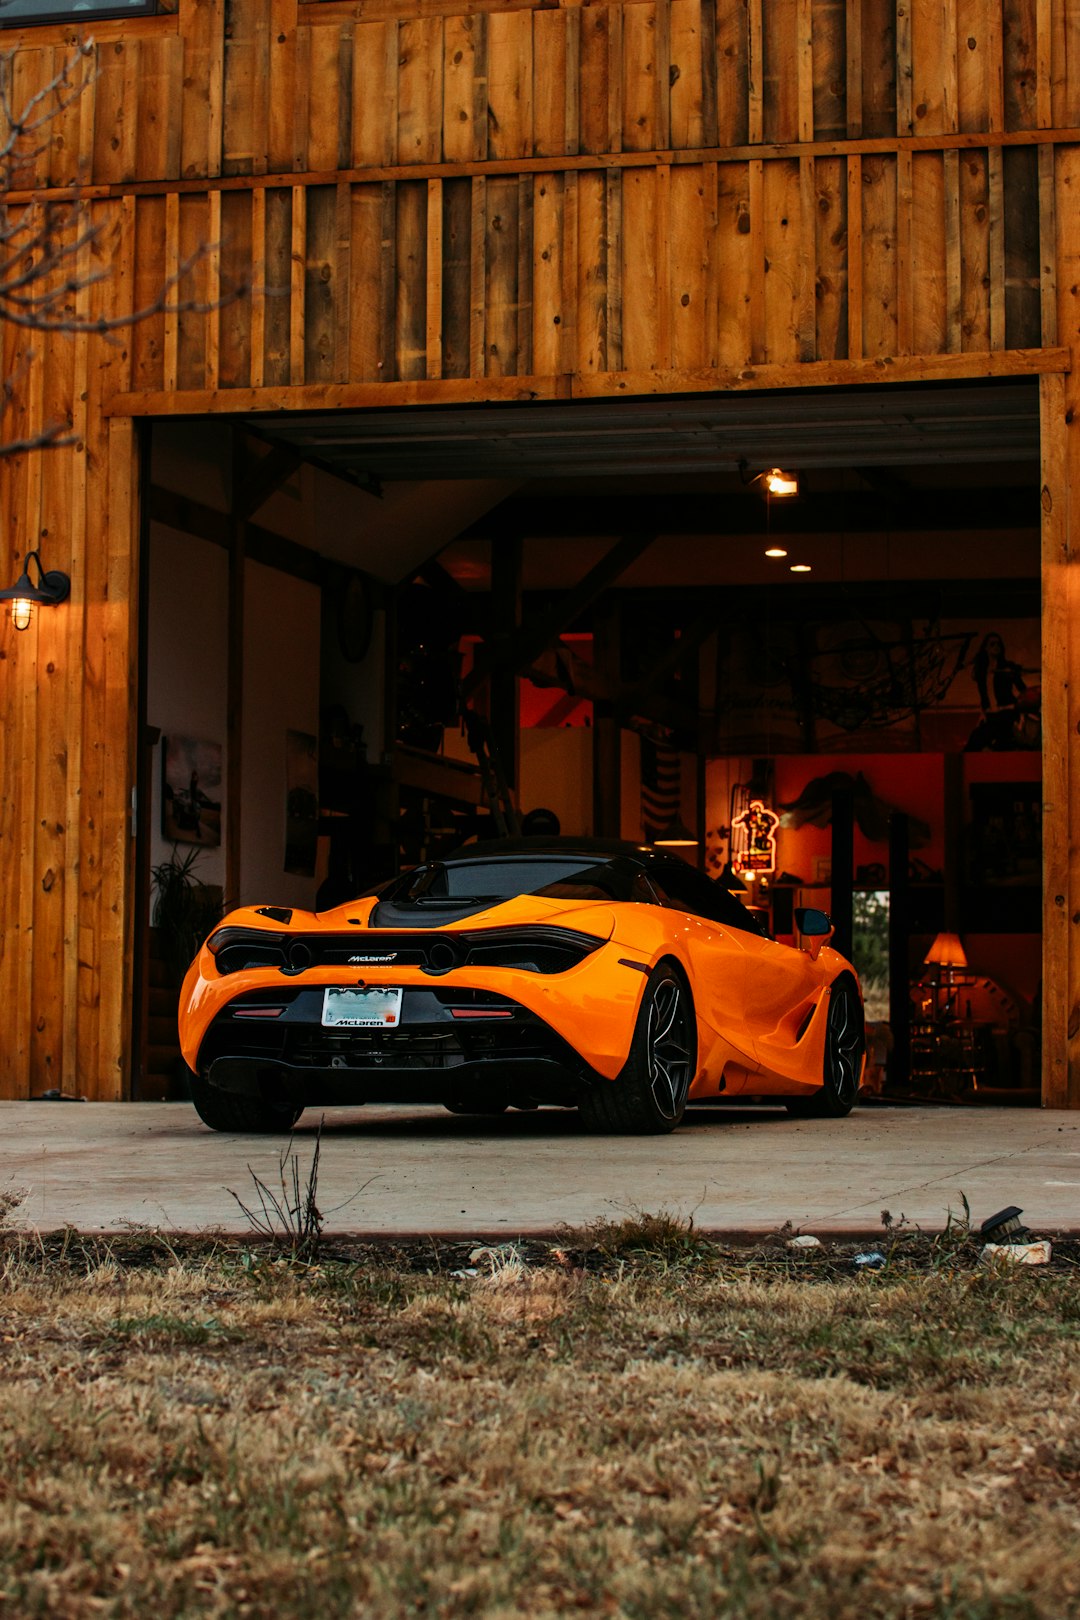 orange lamborghini aventador parked in front of brown wooden building